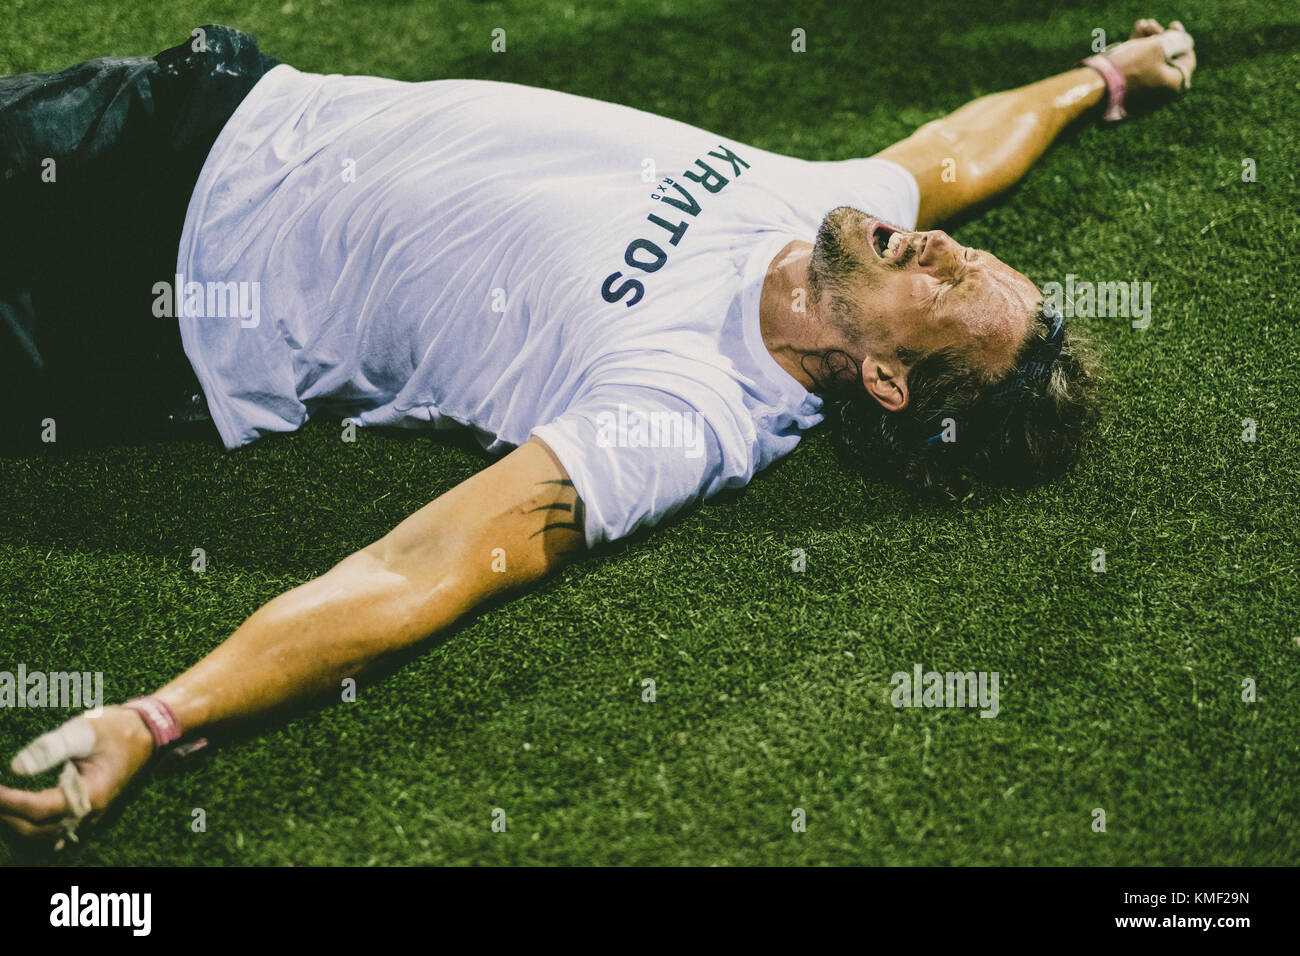 Exhausted athlete lying on grass,Tenerife,Canary Islands,Spain Stock Photo